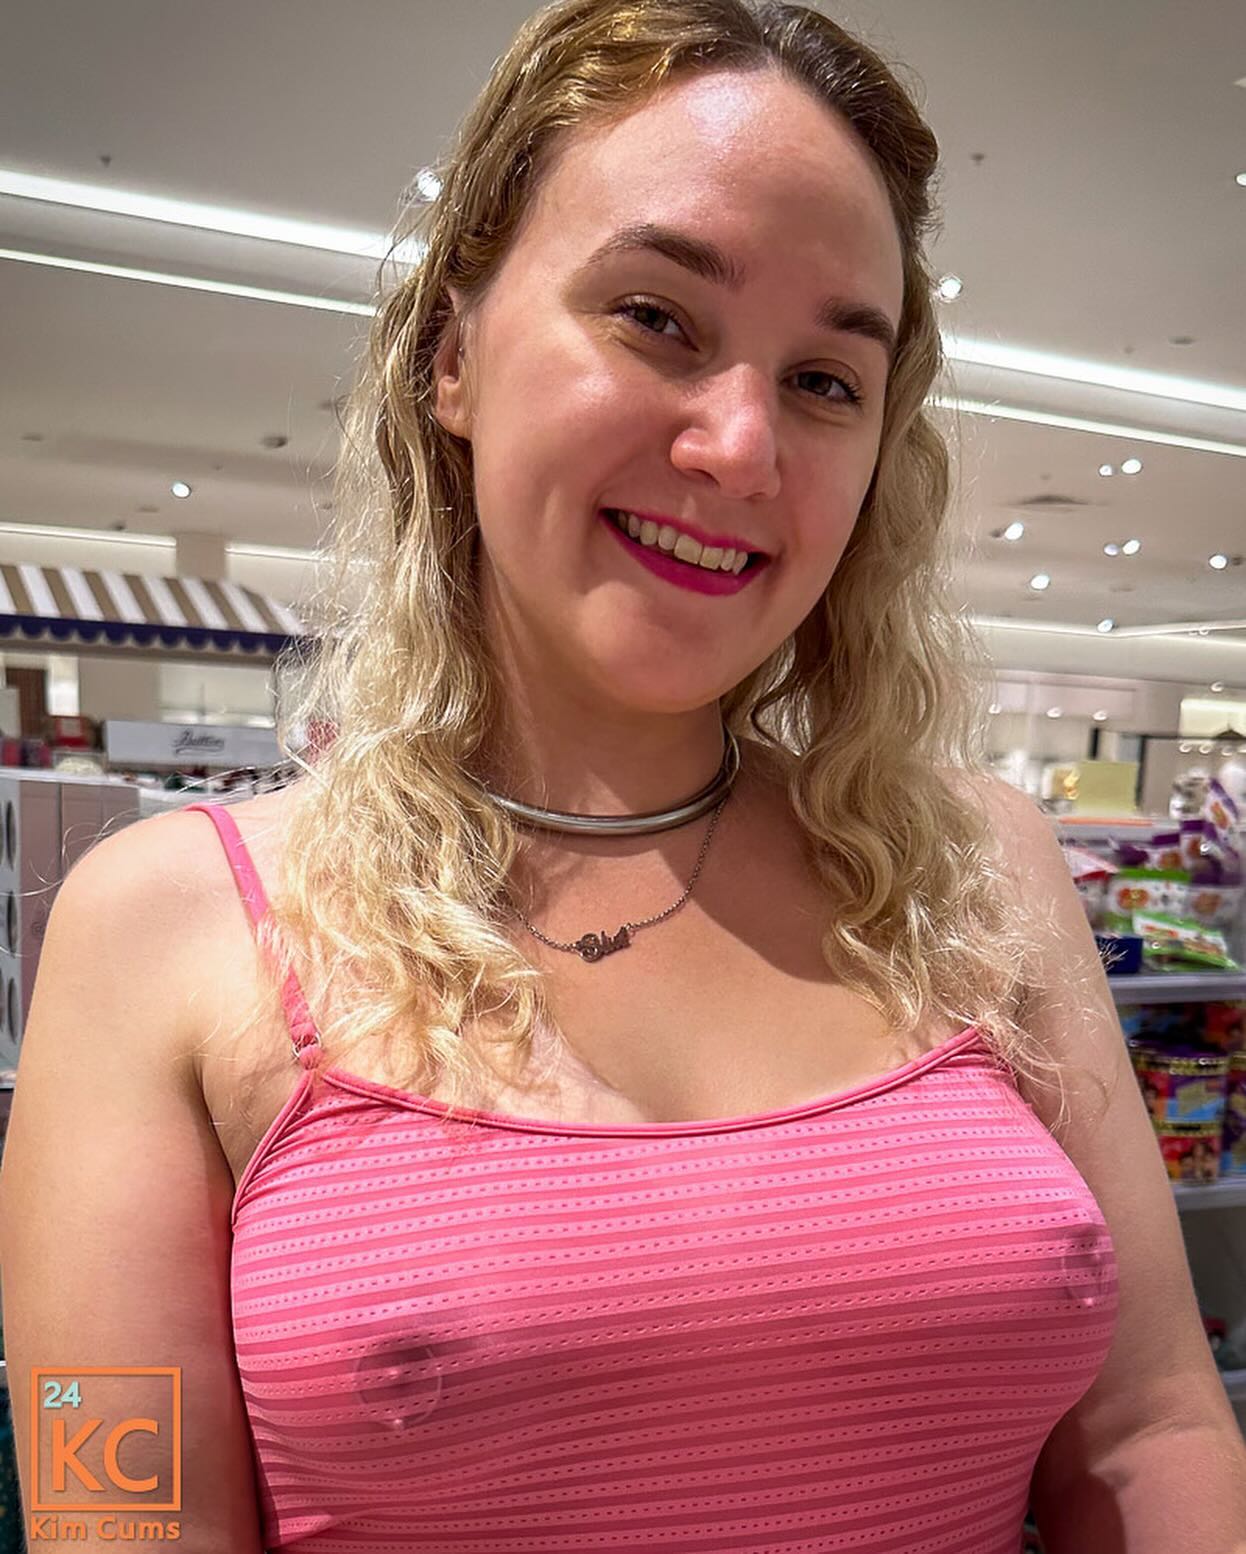 ➡️Pink Bimbo: Shopping⬅️📸7️⃣3️⃣
.
Follow along on my pink bimbo Easter shopping outing in my new gallery on my 🌐Official Website 😃
.
Look what I managed to get my hands on!
.
#bimbos #bimbodoll #wickedweasel #wickedweaseldress #slutnecklace